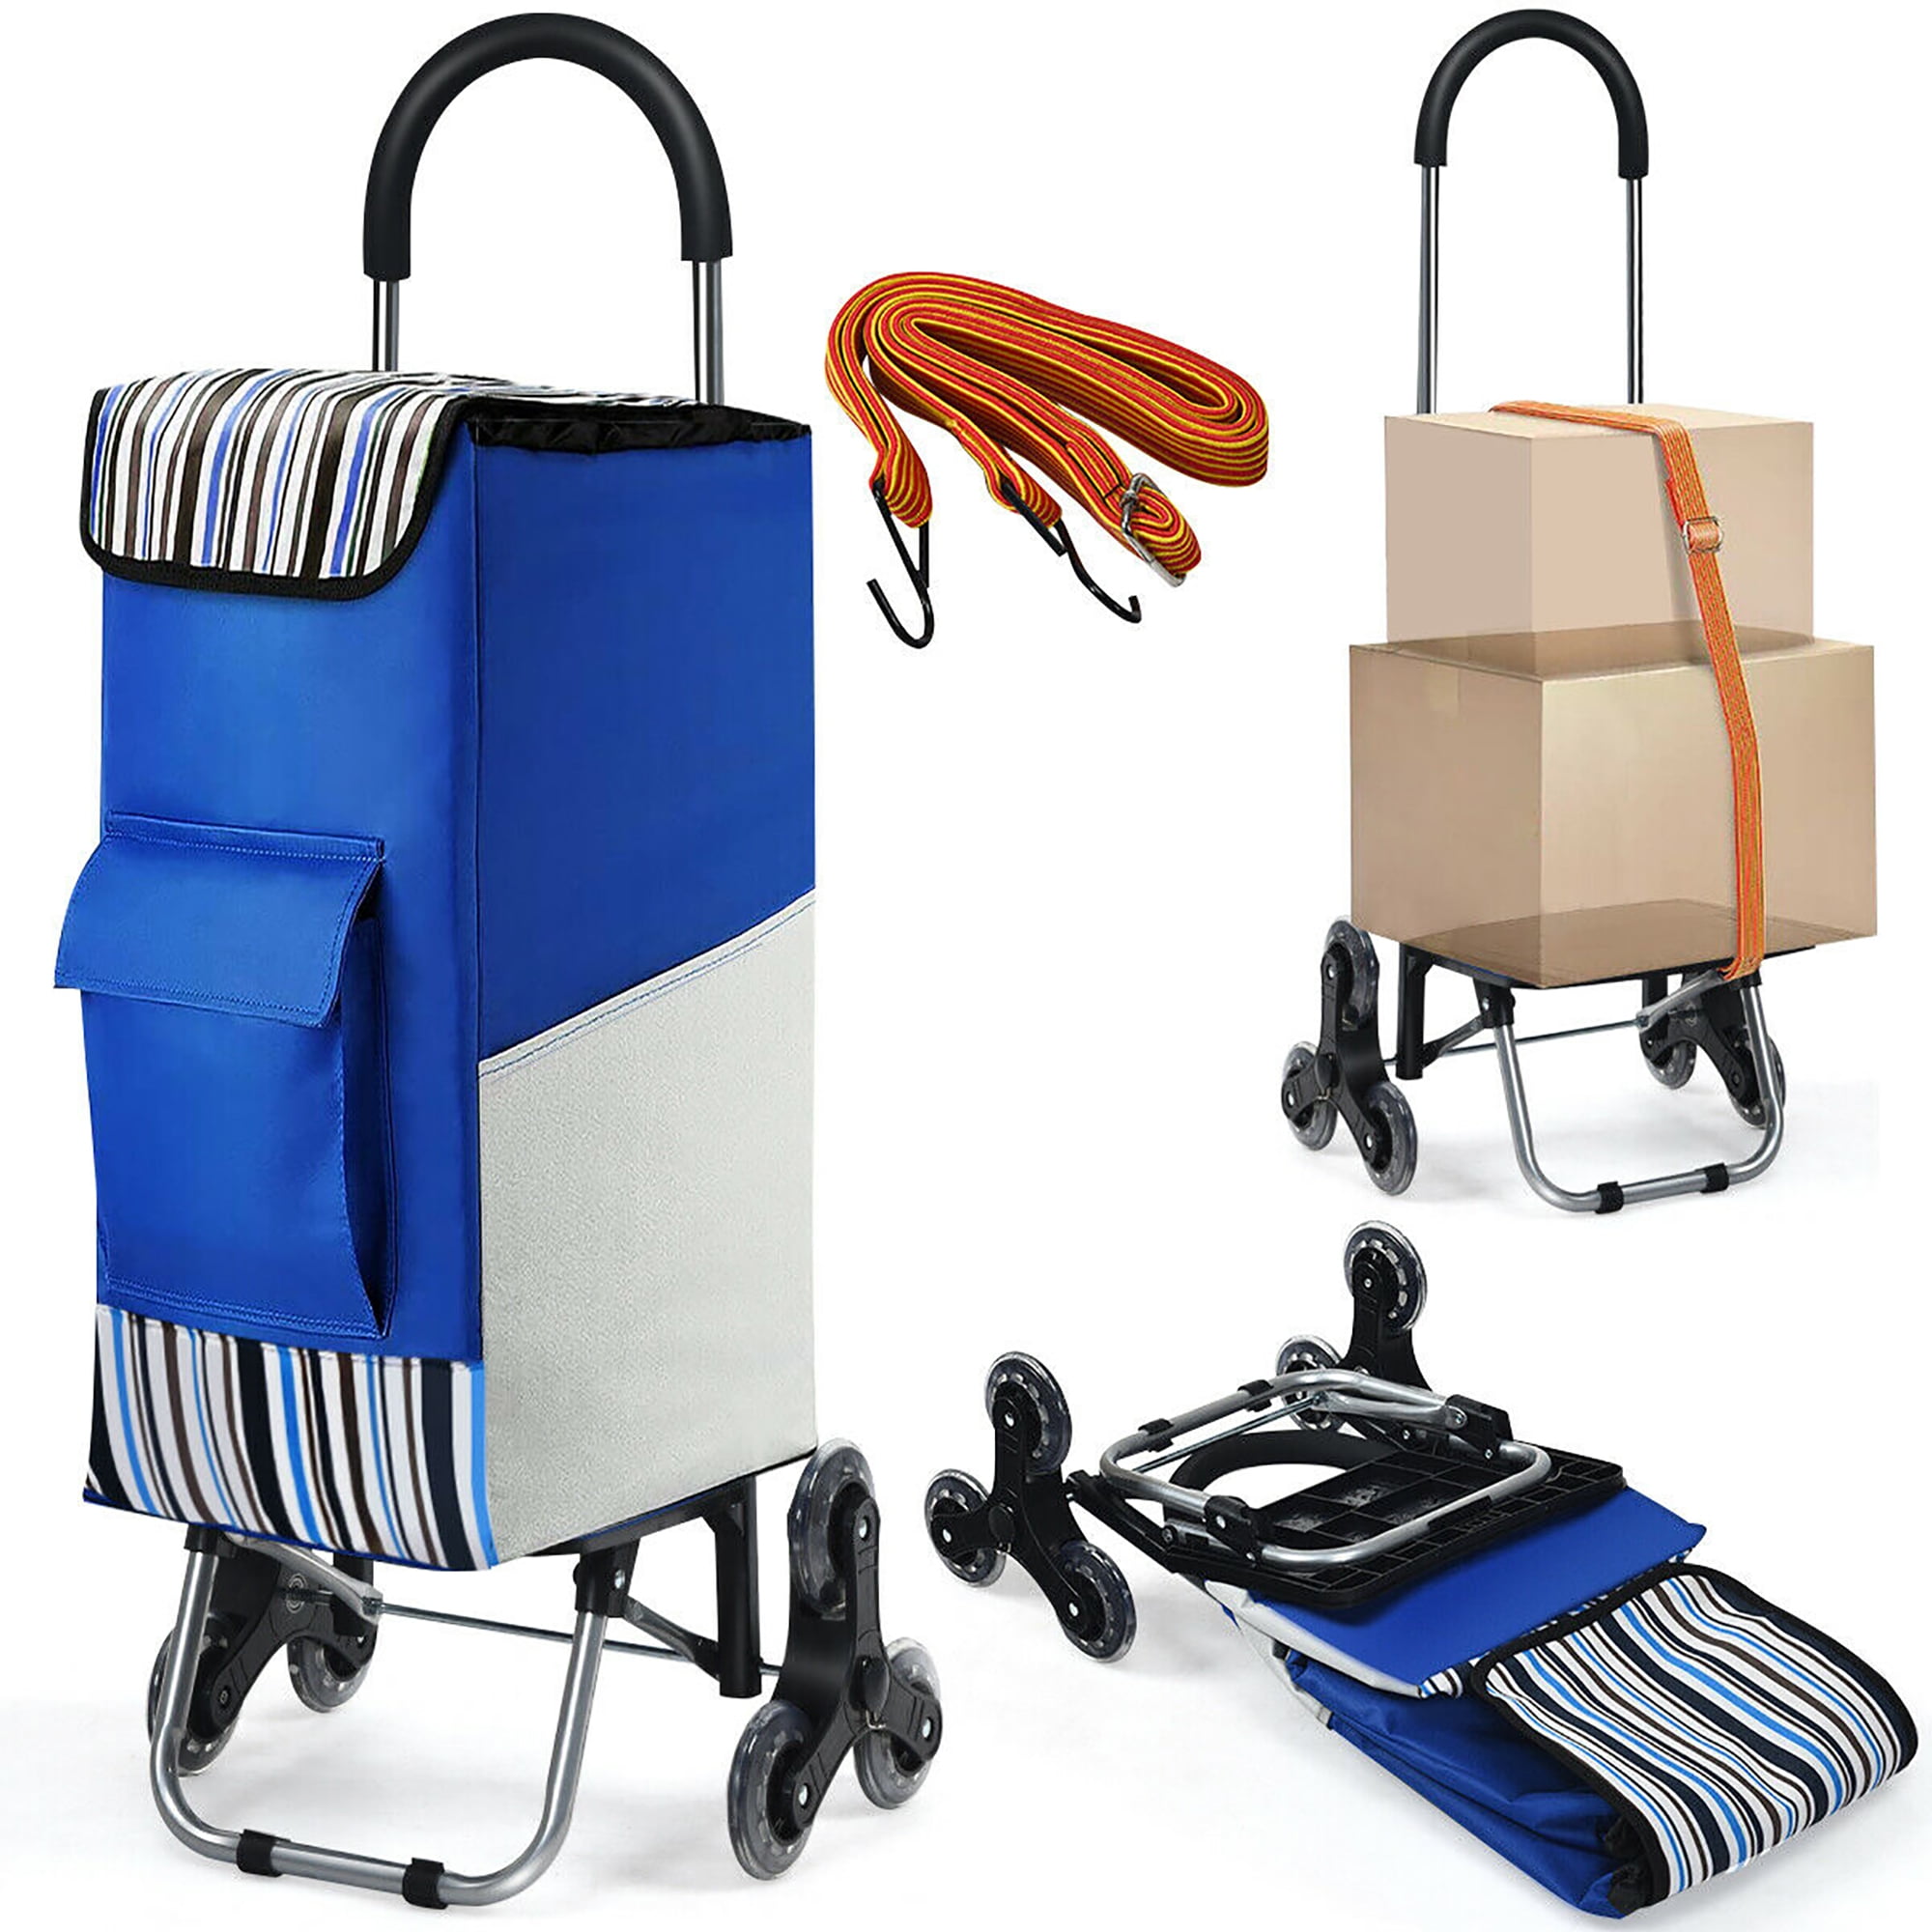 ROIY 2 in 1 Foldable Shopping Cart Collapsible Two-Stage Zipper Shopping Bag Wheels Shopping Cart Jumbo Basket Cart Rolling Wheels Loading Utility Shopping Cart Laundry Shopping Luggage Grocery 